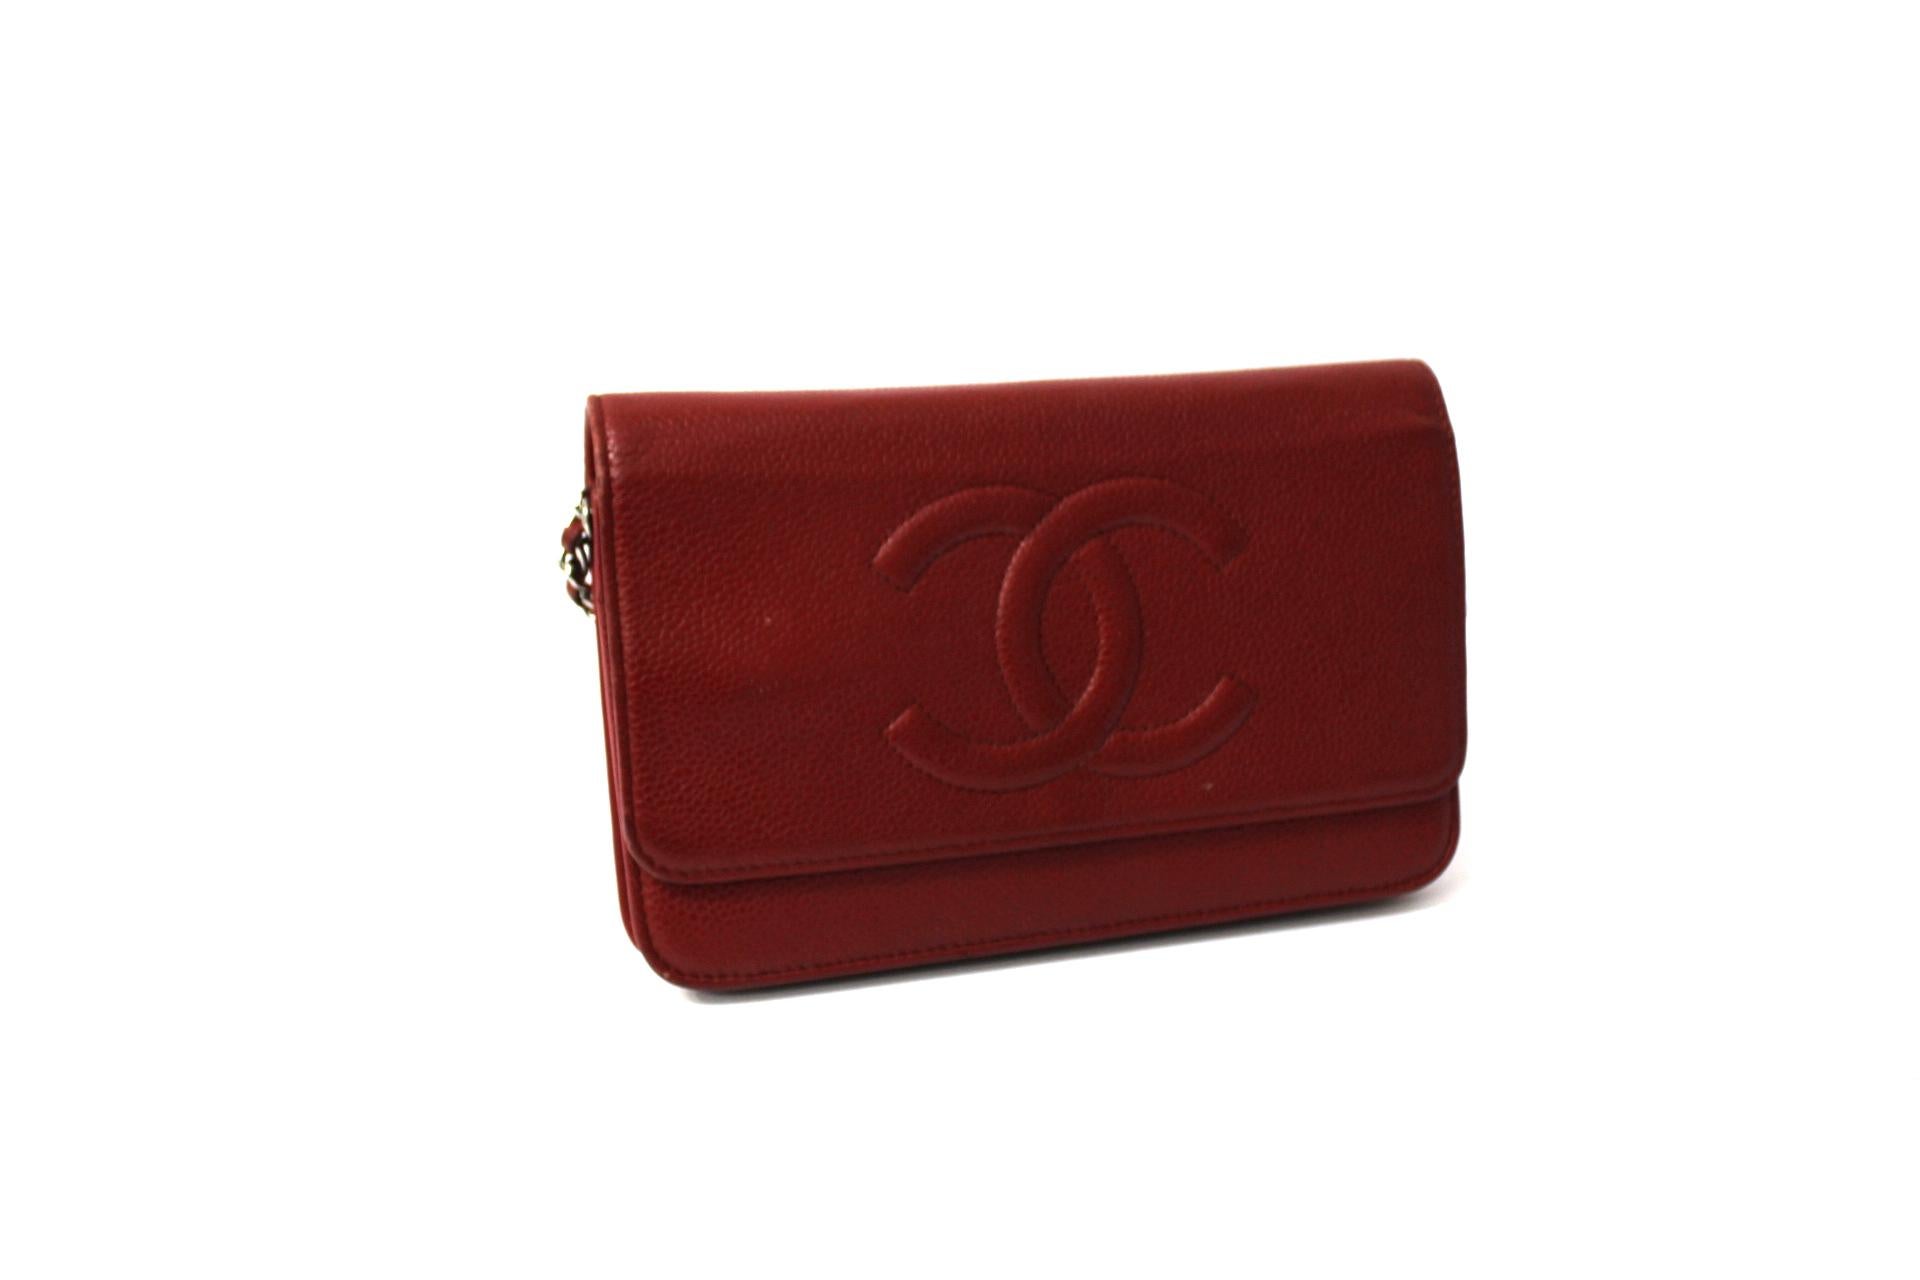 Chanel woc model bag made of textured red leather and silver hardware.
Button closure, internally capacious for the essentials and equipped with compartments for cards.
Equipped with leather and chain shoulder strap. The bag has some signs of wear.